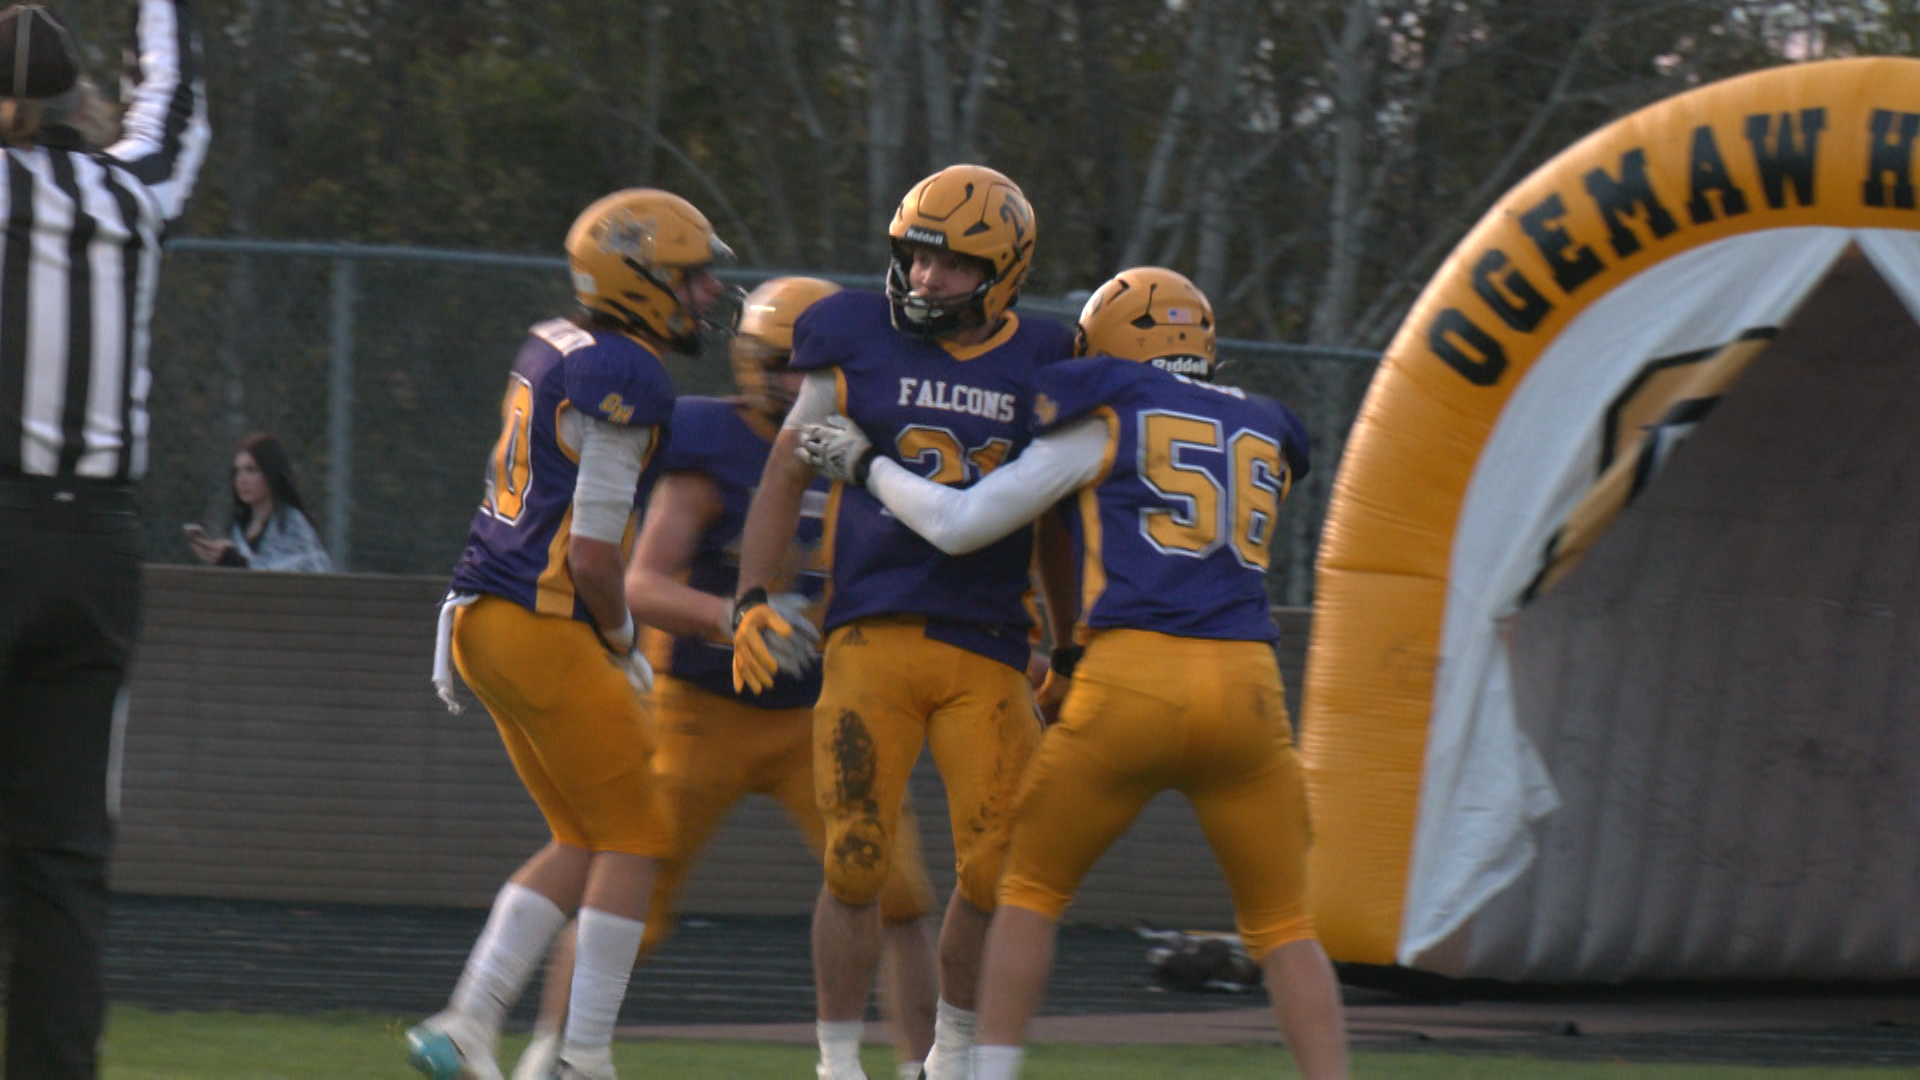 GAME OF THE WEEK: Ogemaw Heights contains Kingsley for first division title since 2009